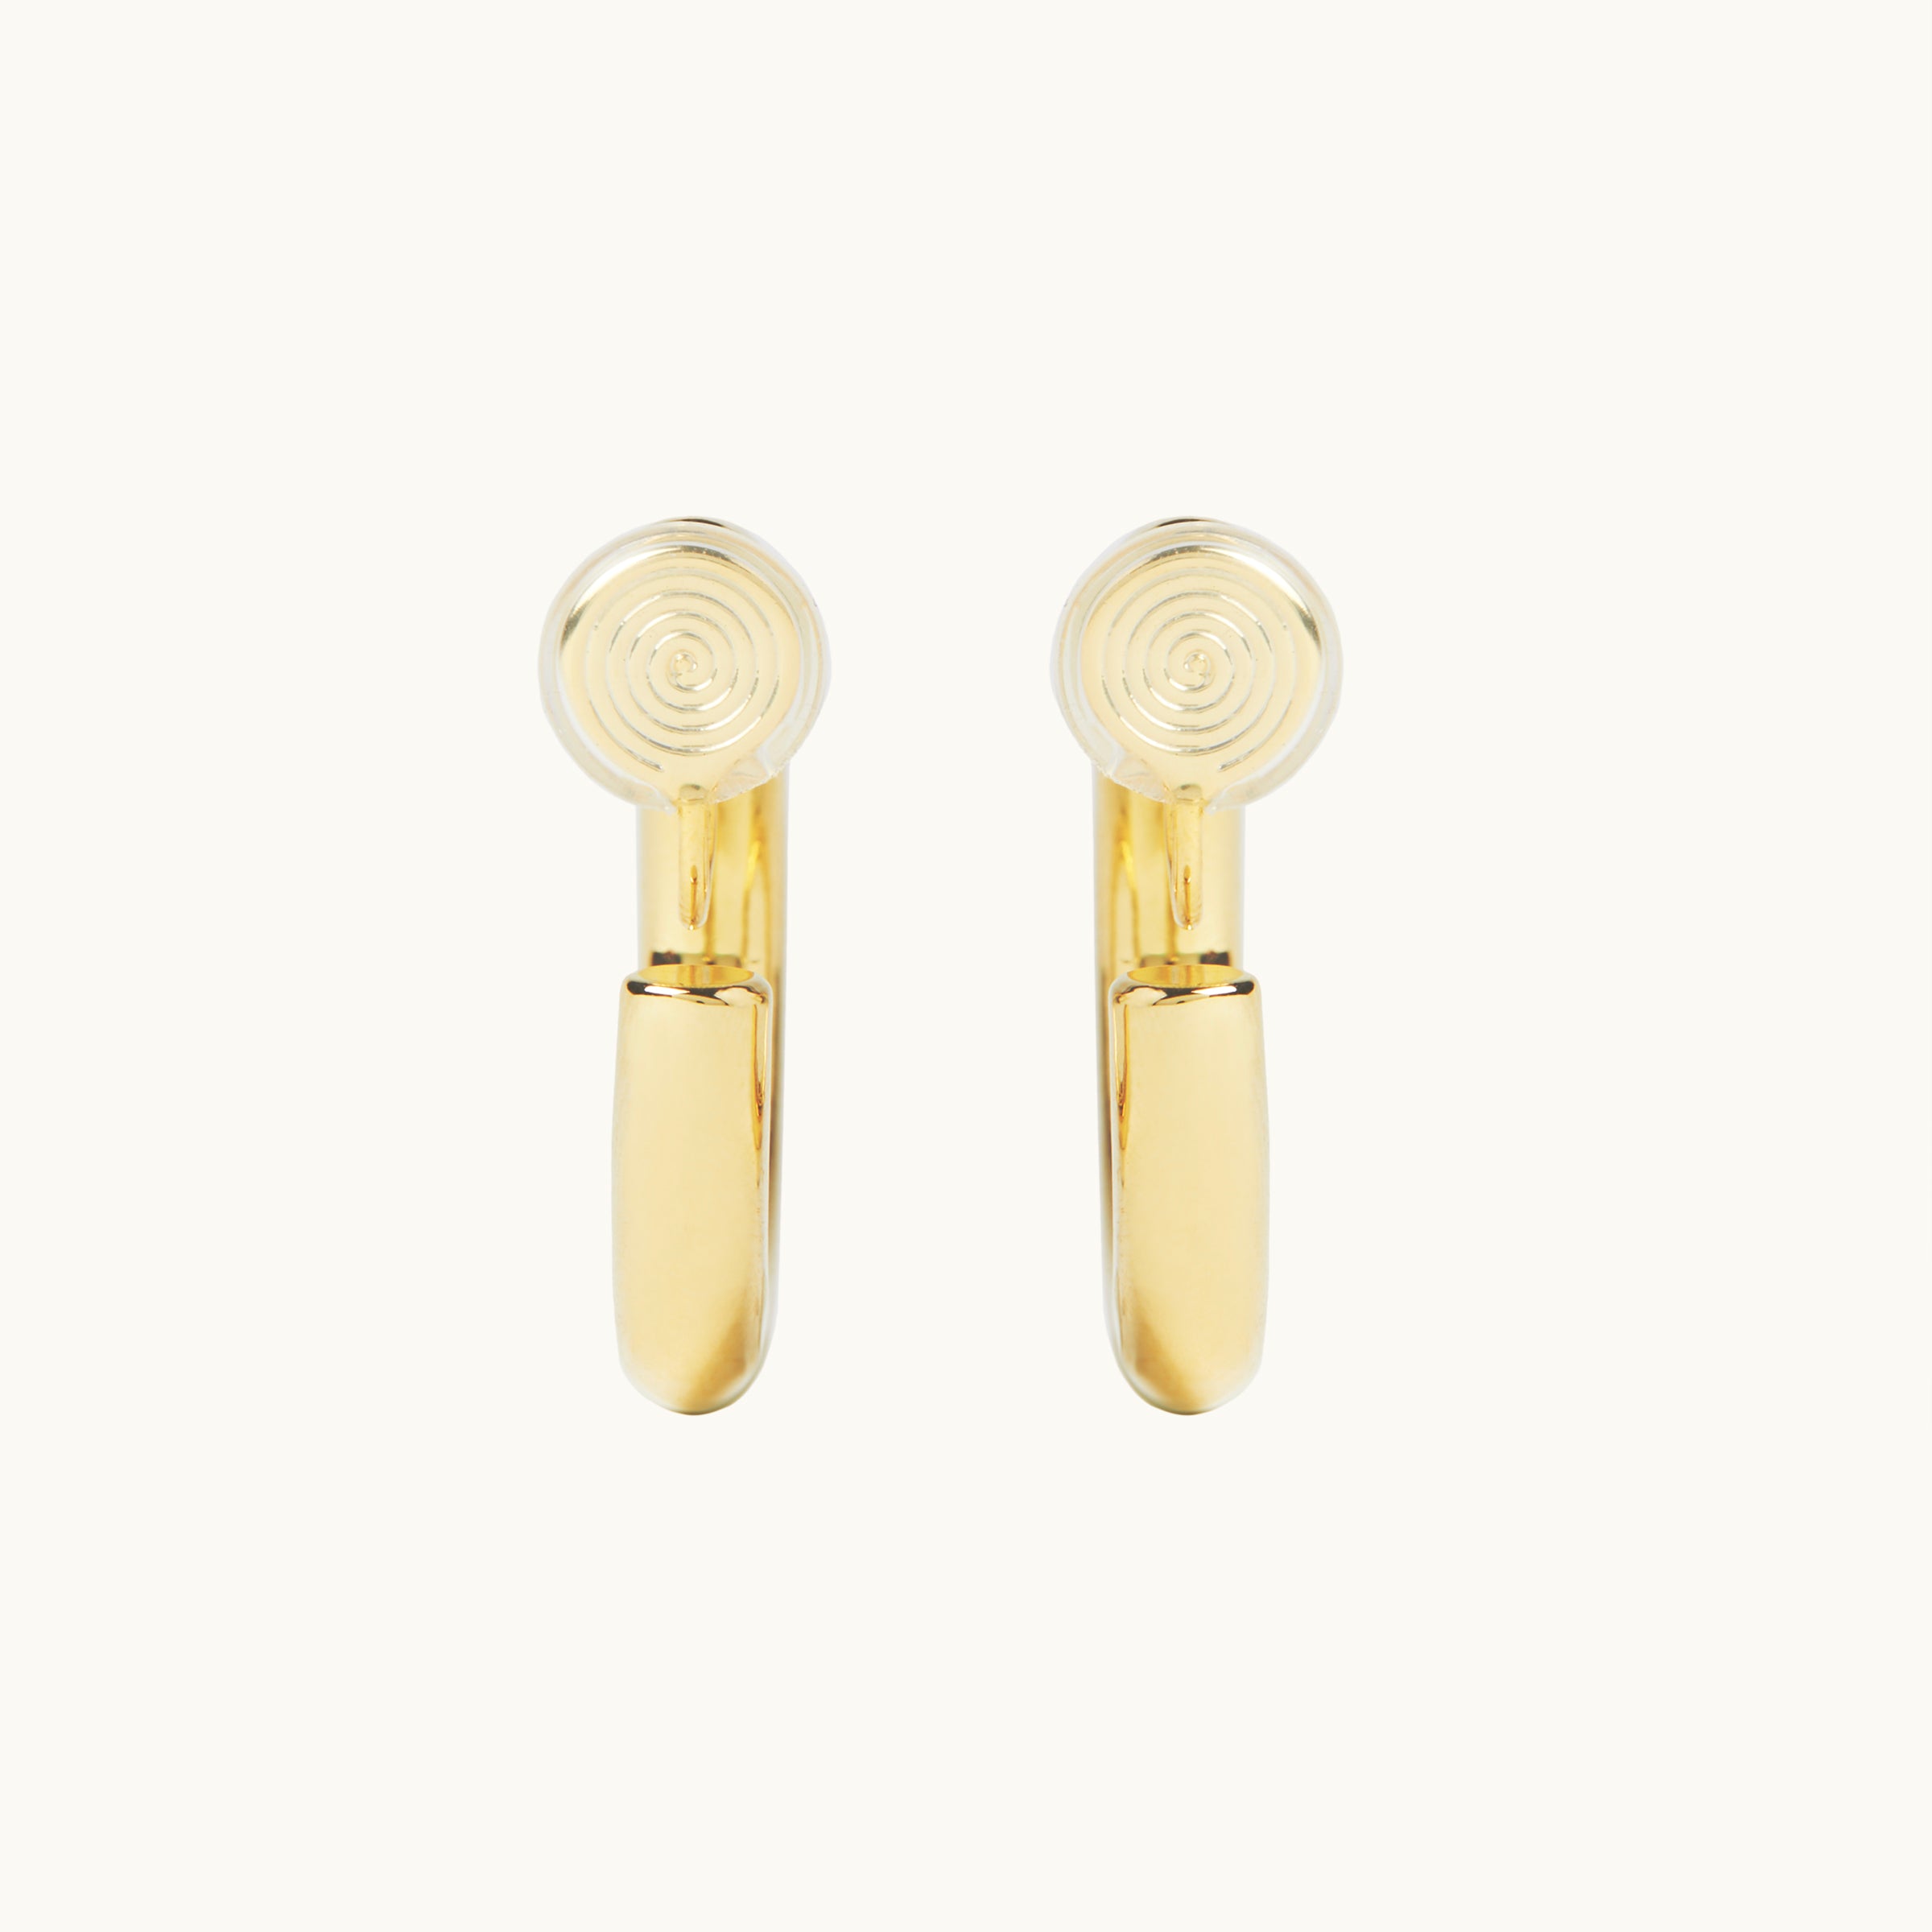 Image of the Allie Hoop Clip On Earrings in Gold, which are perfect for all ear types. The Mosquito Coil Clip-On Closure is suitable for Thick/Large, Sensitive, Small/Thin, Stretched/Healing, and Keloid Prone Ears. Made of a Gold tone copper alloy, each purchase includes one pair.